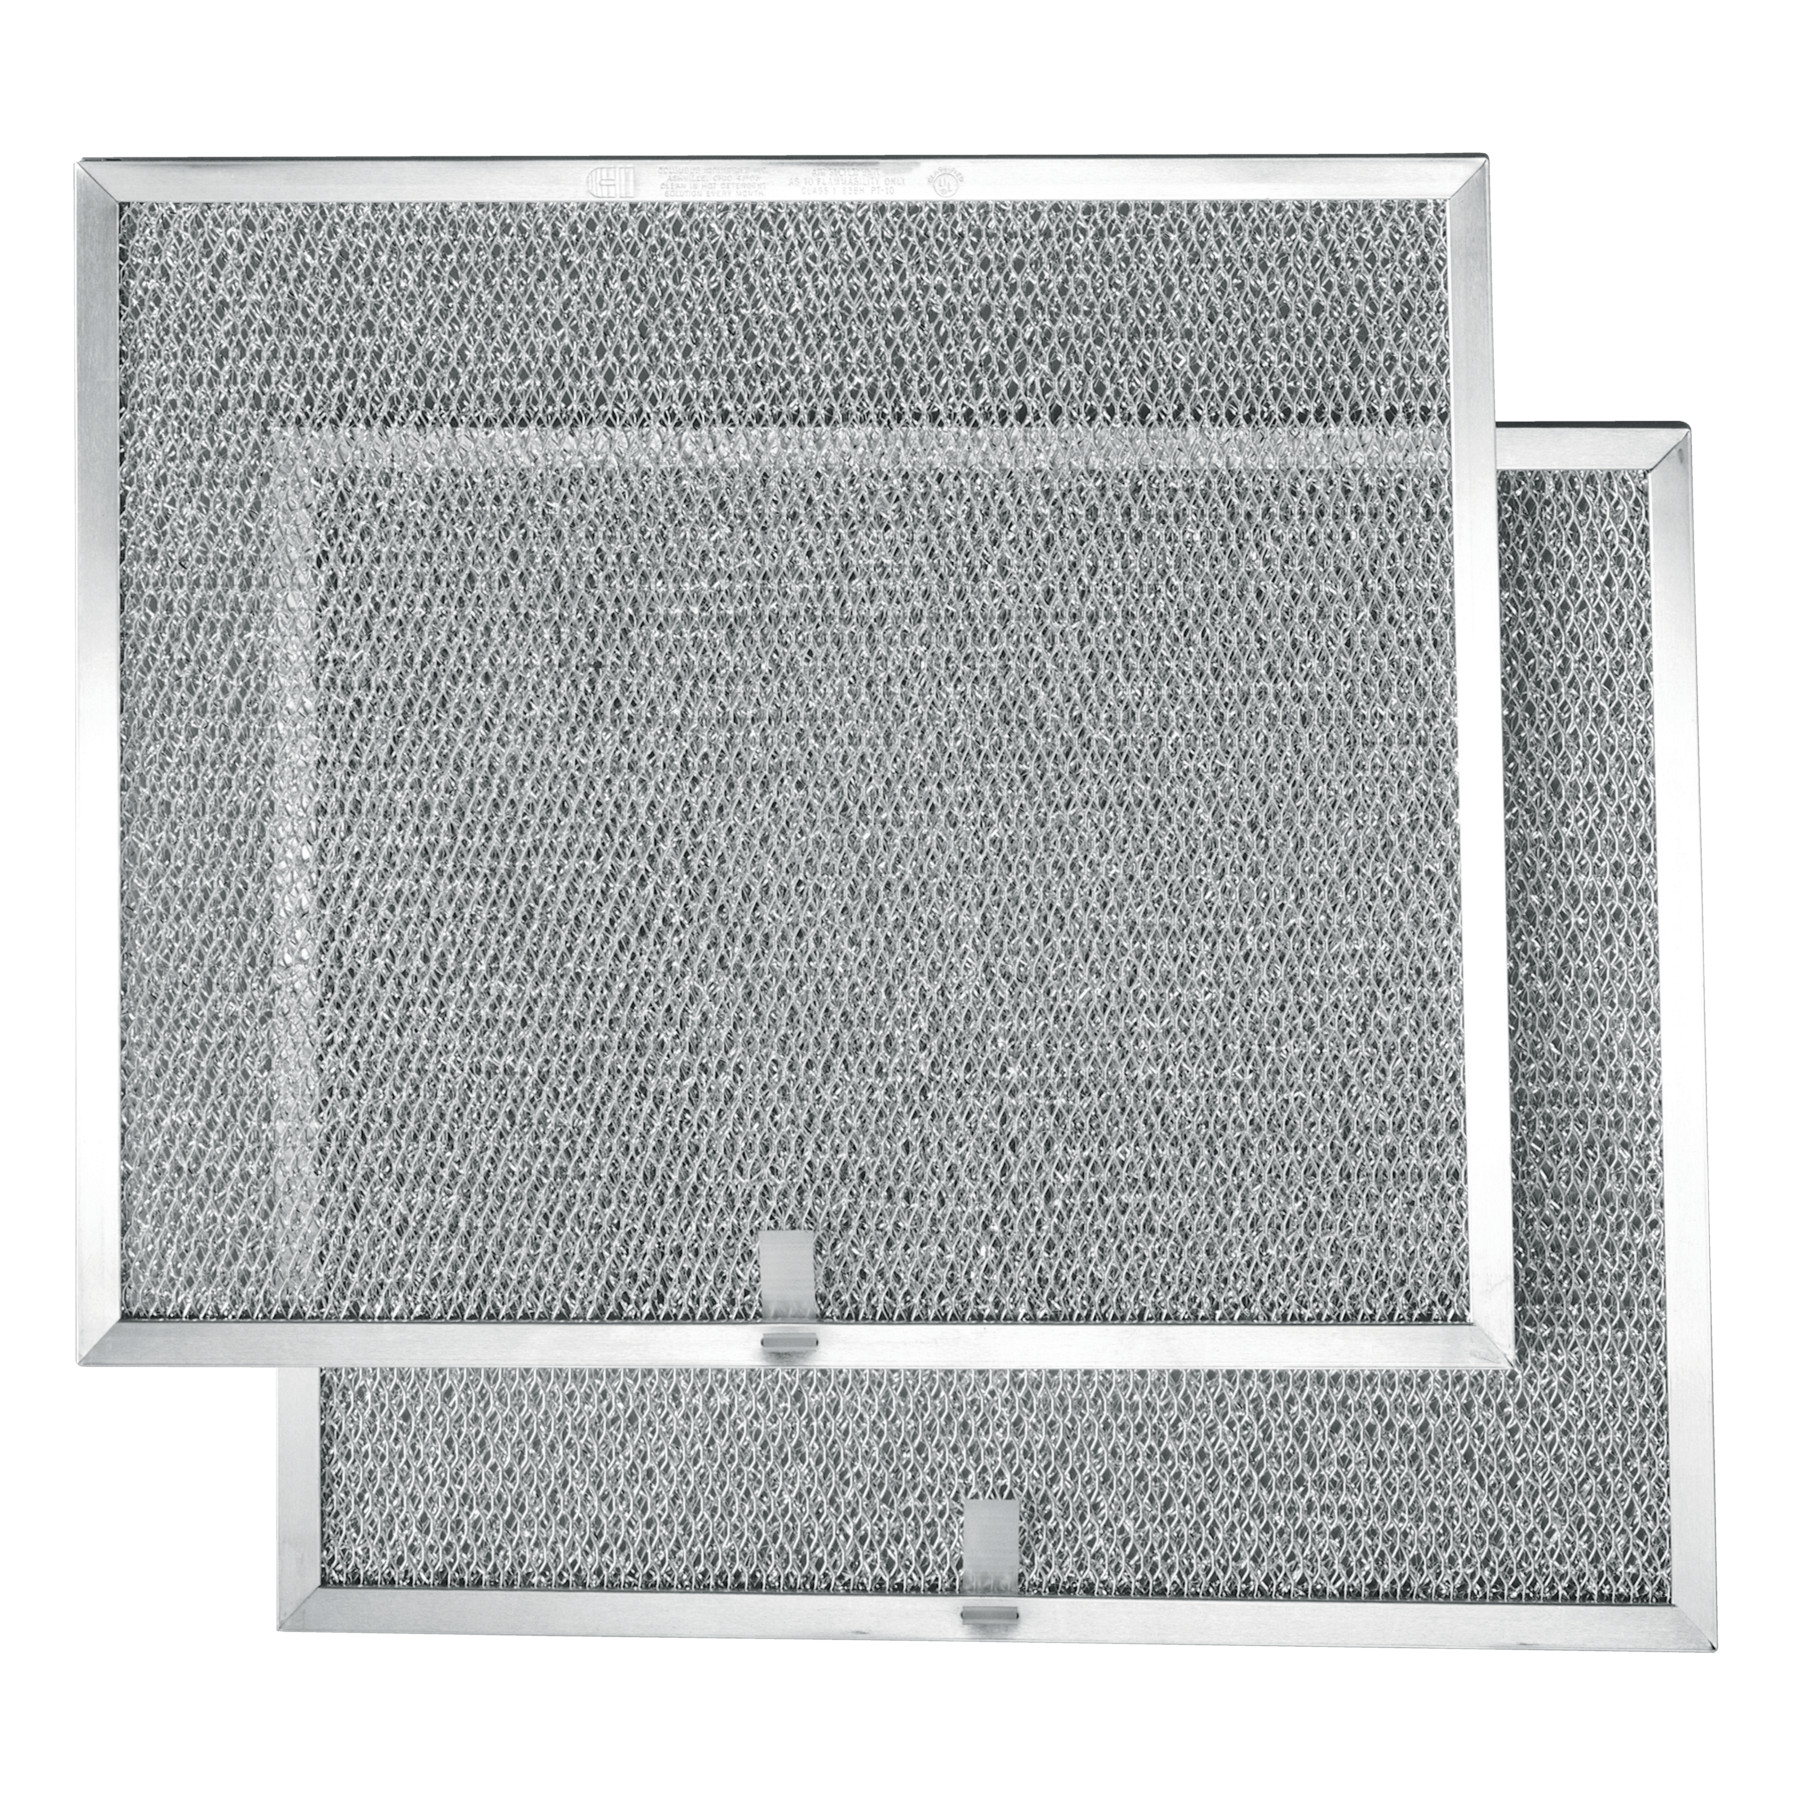 Broan BP58 Non-Ducted Charcoal Replacement Filter Pads for Range Hood